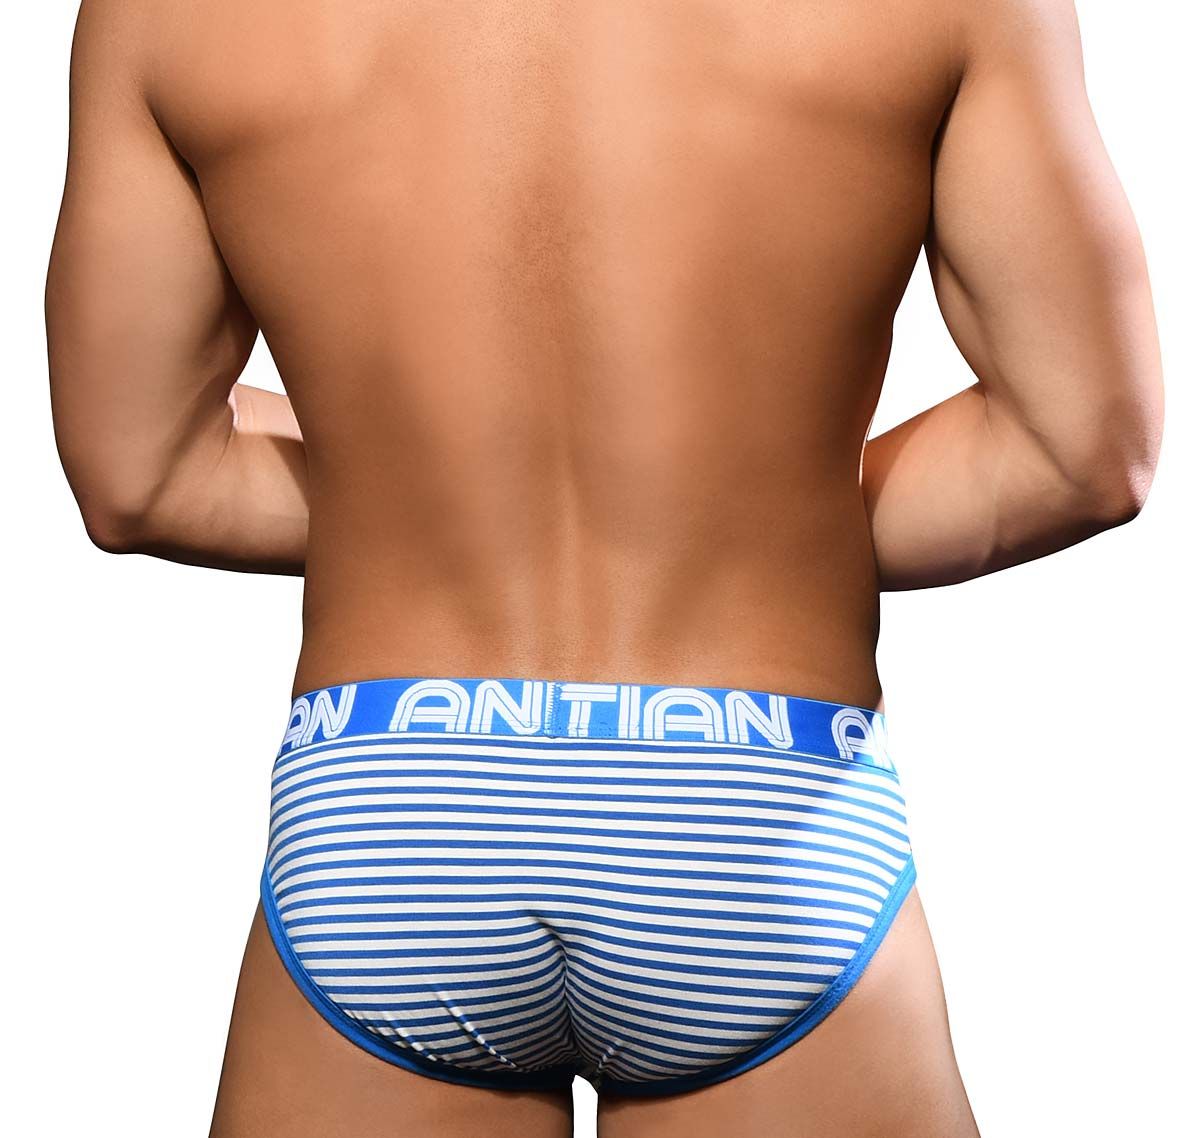 Andrew Christian Slip FLY BRIEF w/ ALMOST NAKED 92738, bleu/blanc